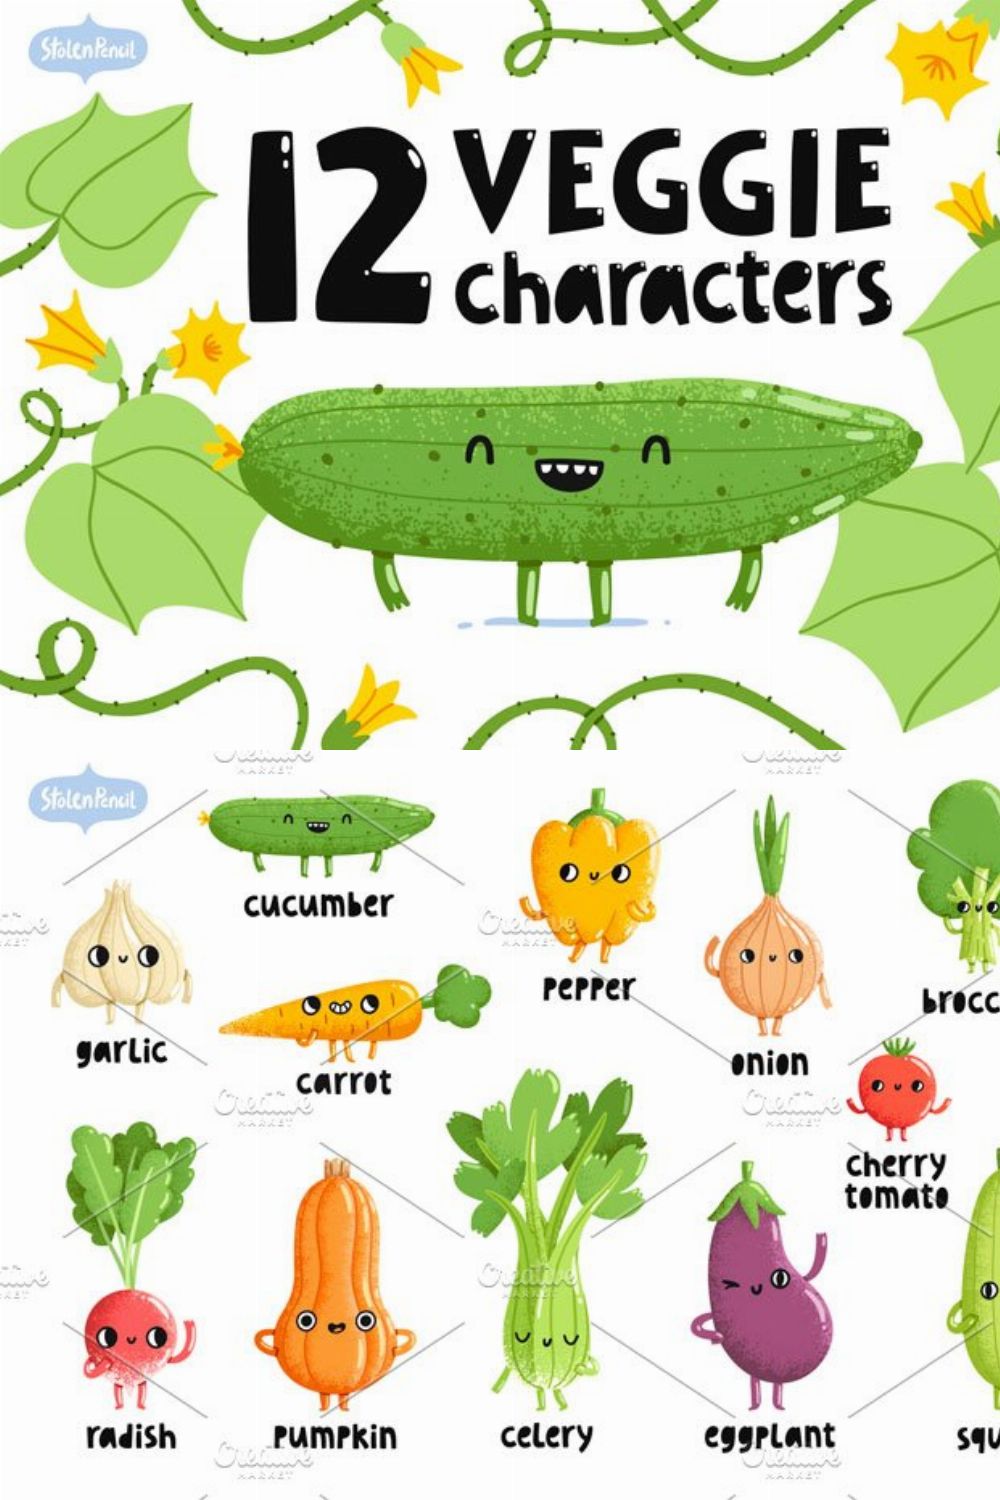 Veggie characters set pinterest preview image.